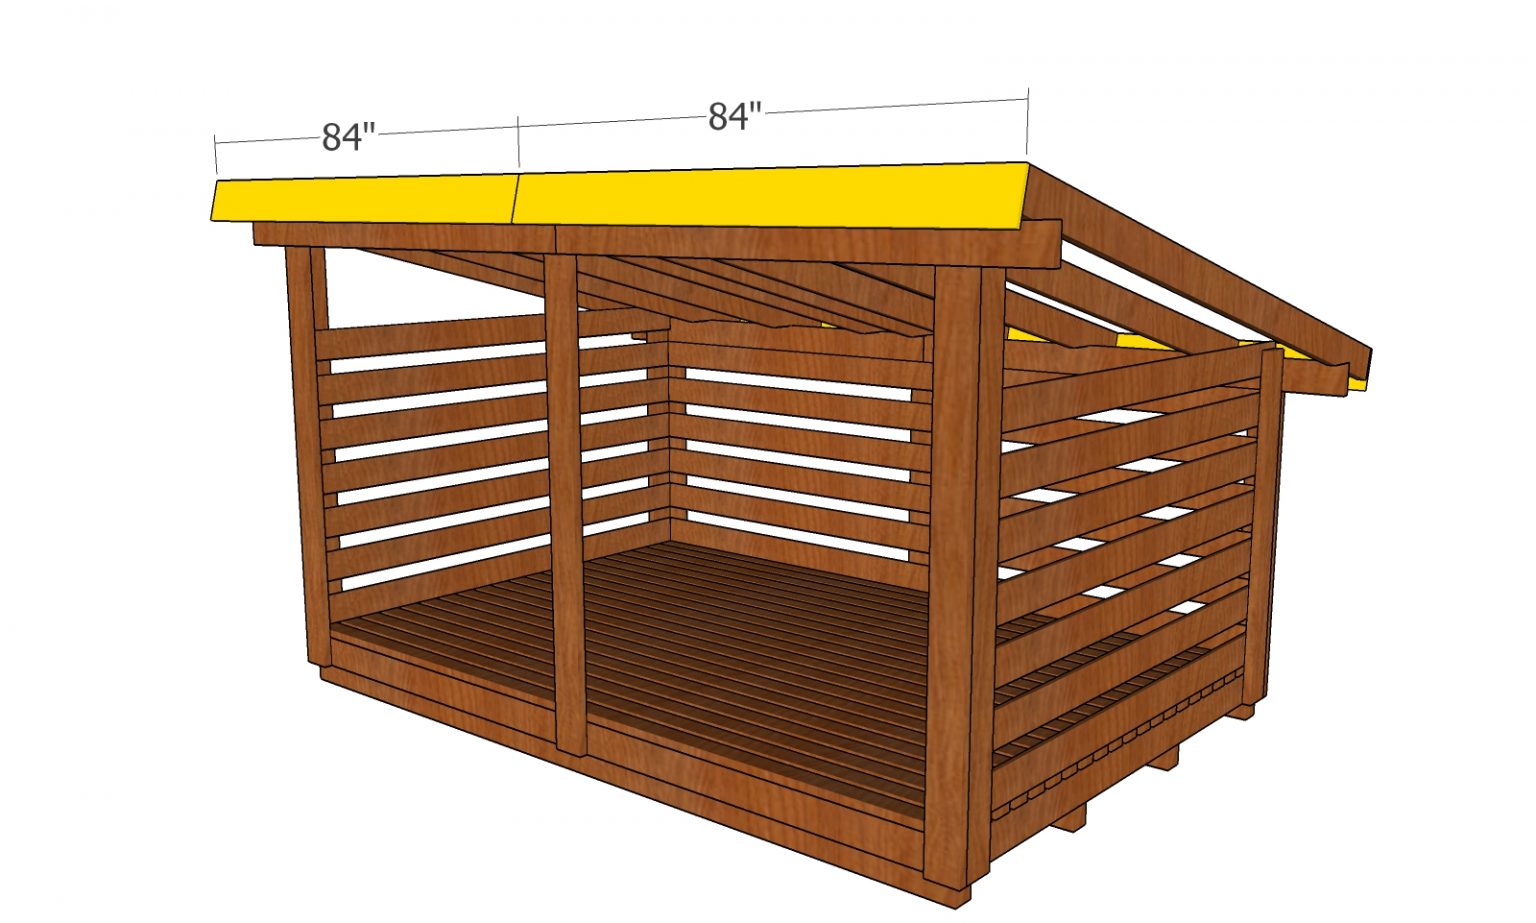 8x12 Firewood Shed Plans - 4 Cord Wood Storage Free Garden Plans 